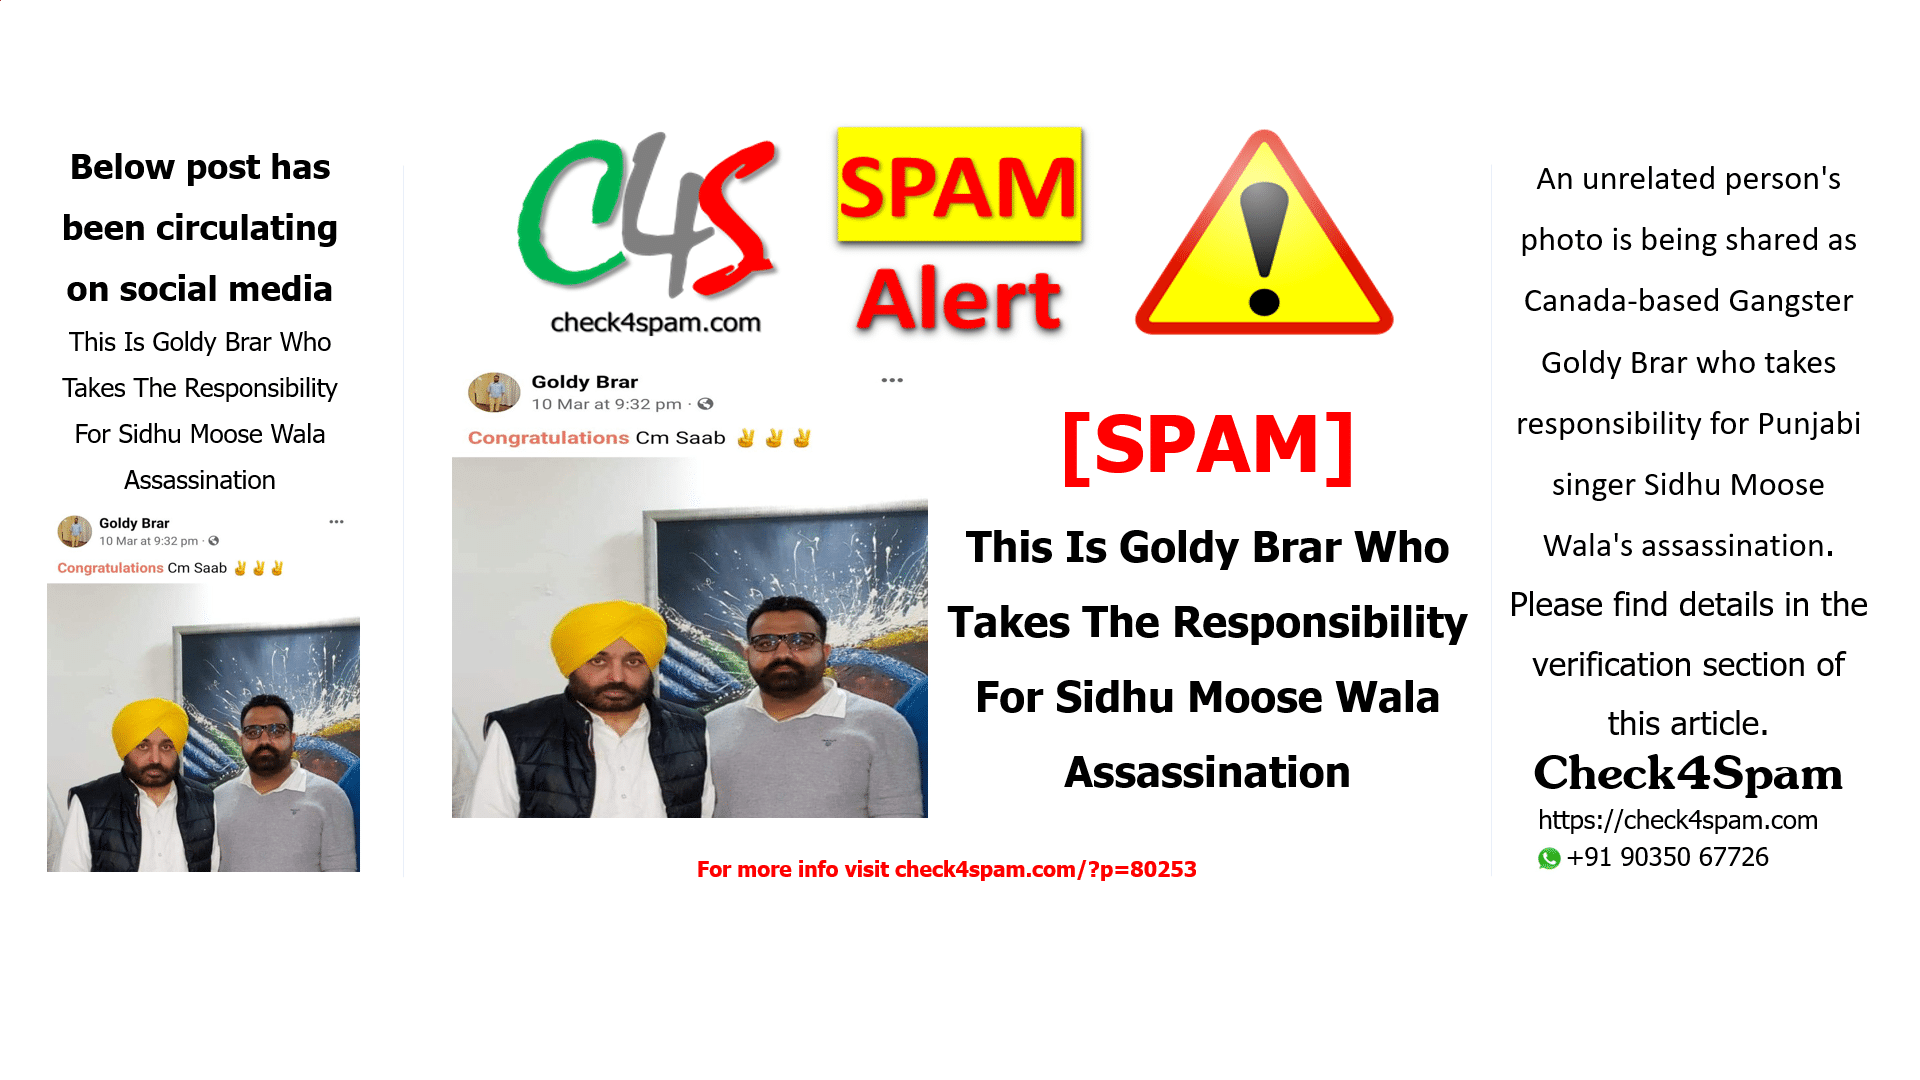 This Is Goldy Brar Who Takes The Responsibility For Sidhu Moose Wala Assassination